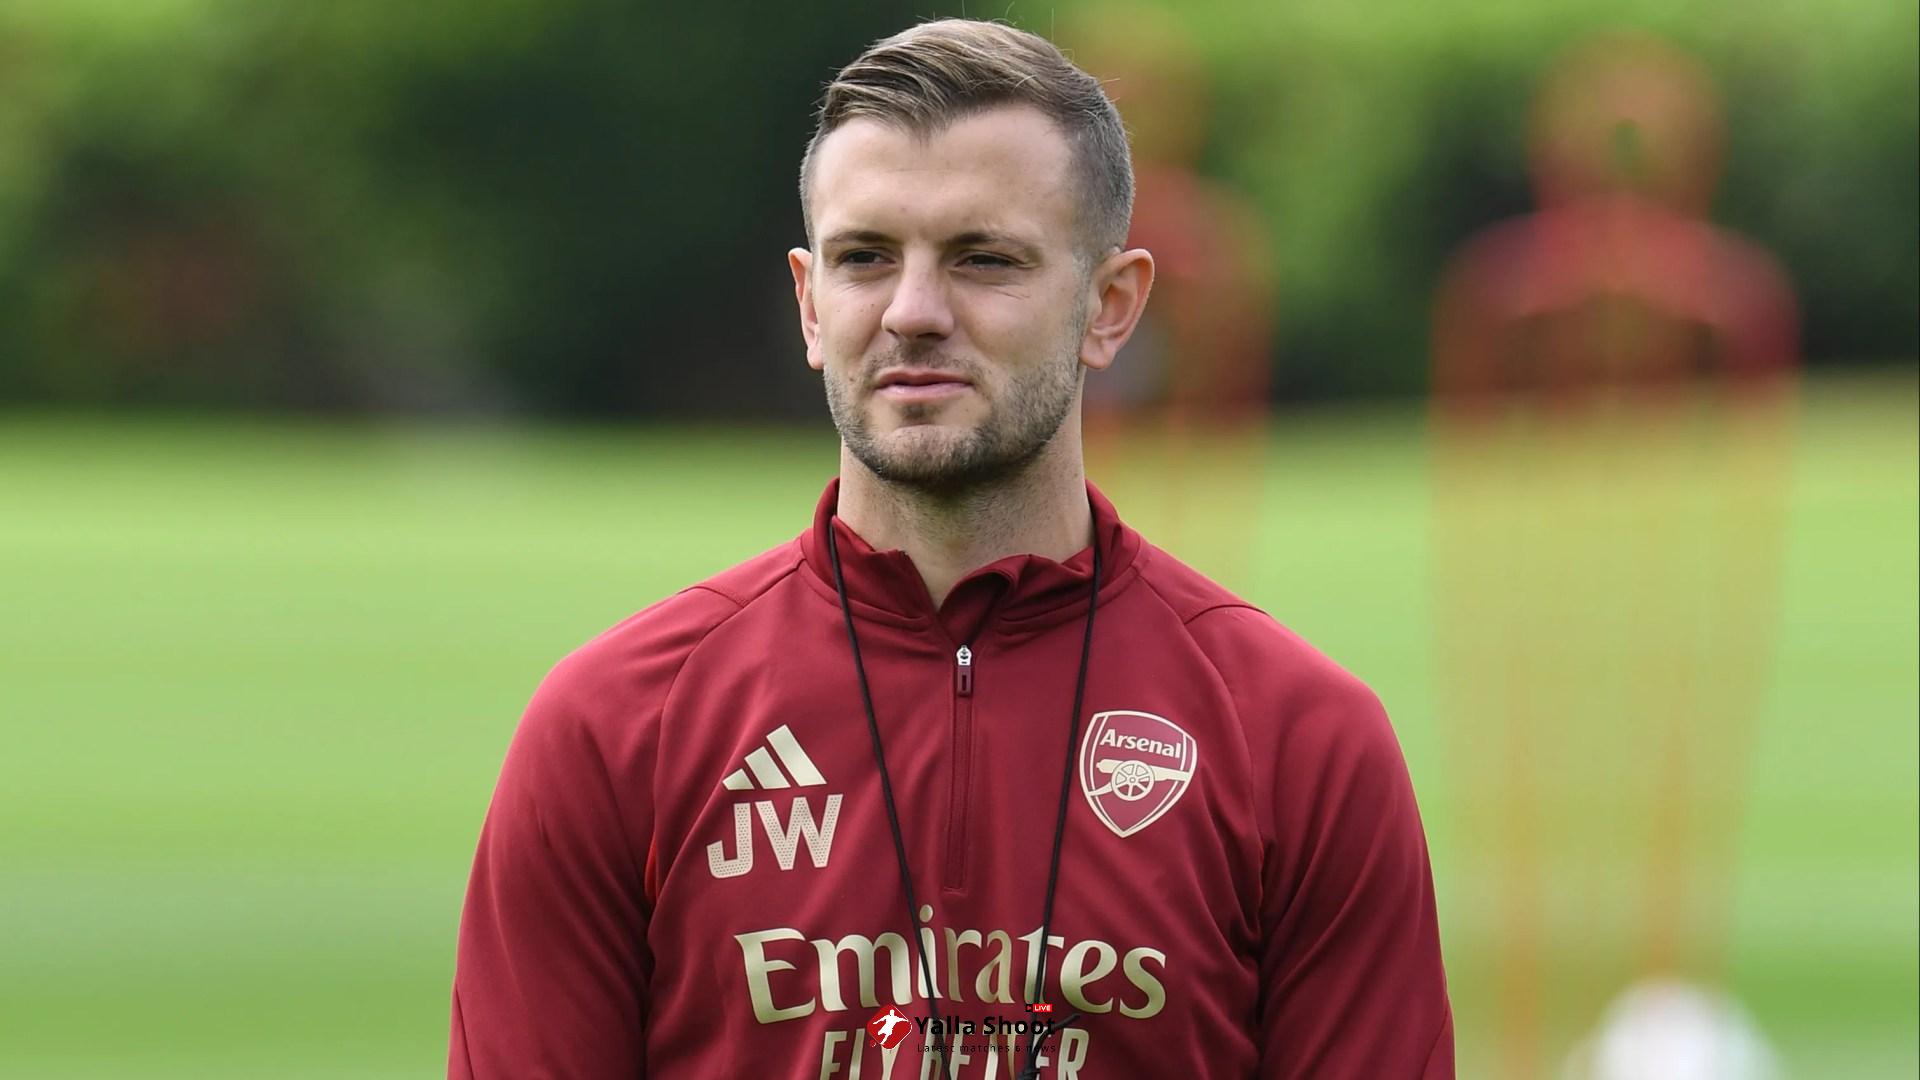 Arsenal starlet Jack Wilshere said can 'do things you can't coach' agrees transfer exit with monstrous sell-on clause